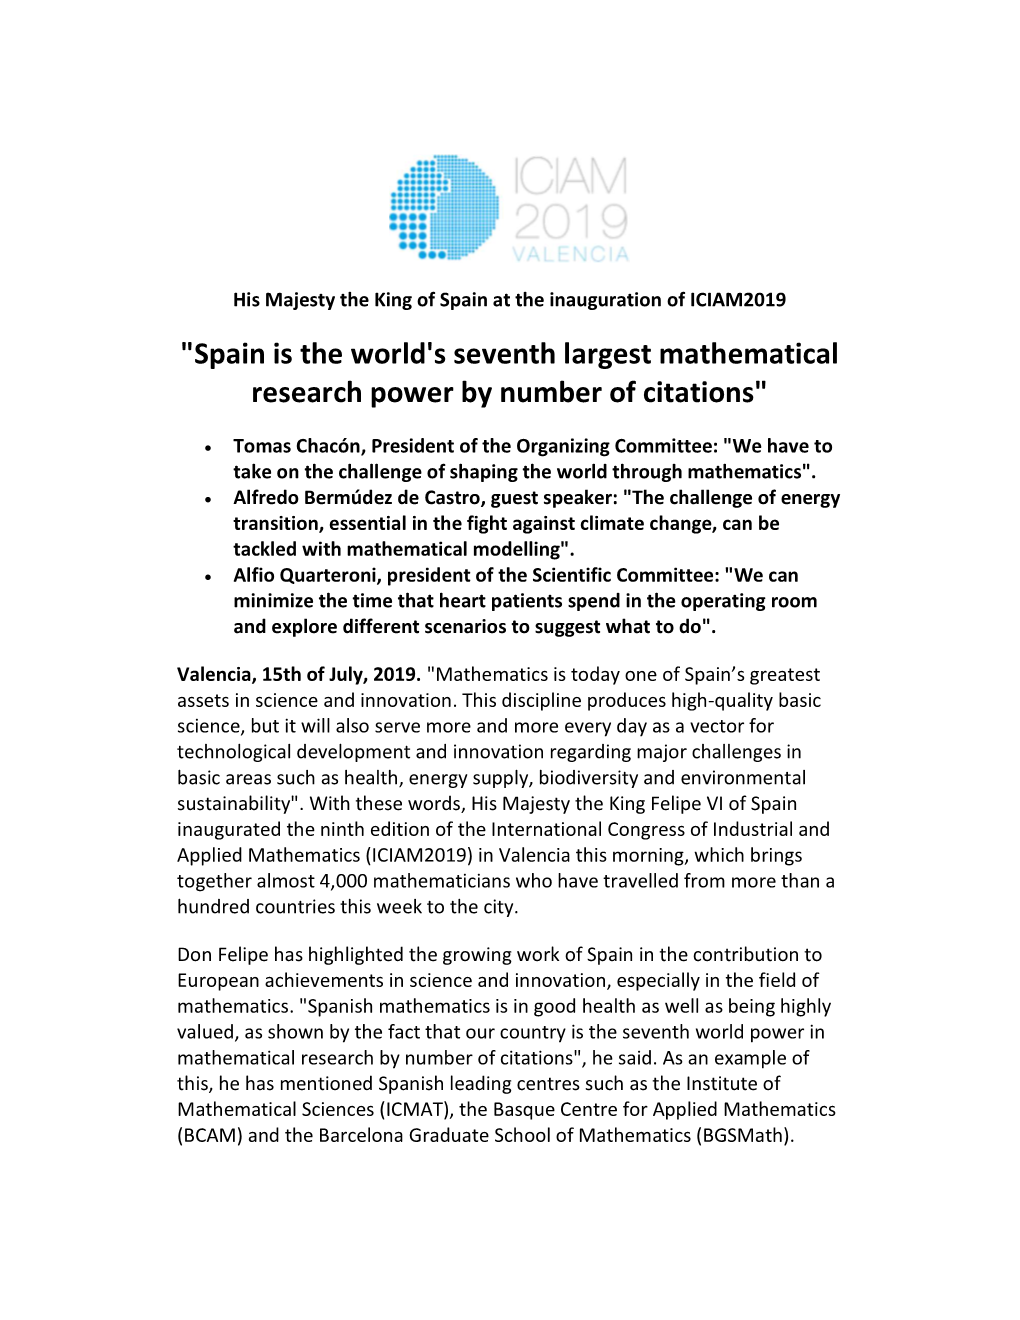 Spain Is the World's Seventh Largest Mathematical Research Power by Number of Citations"